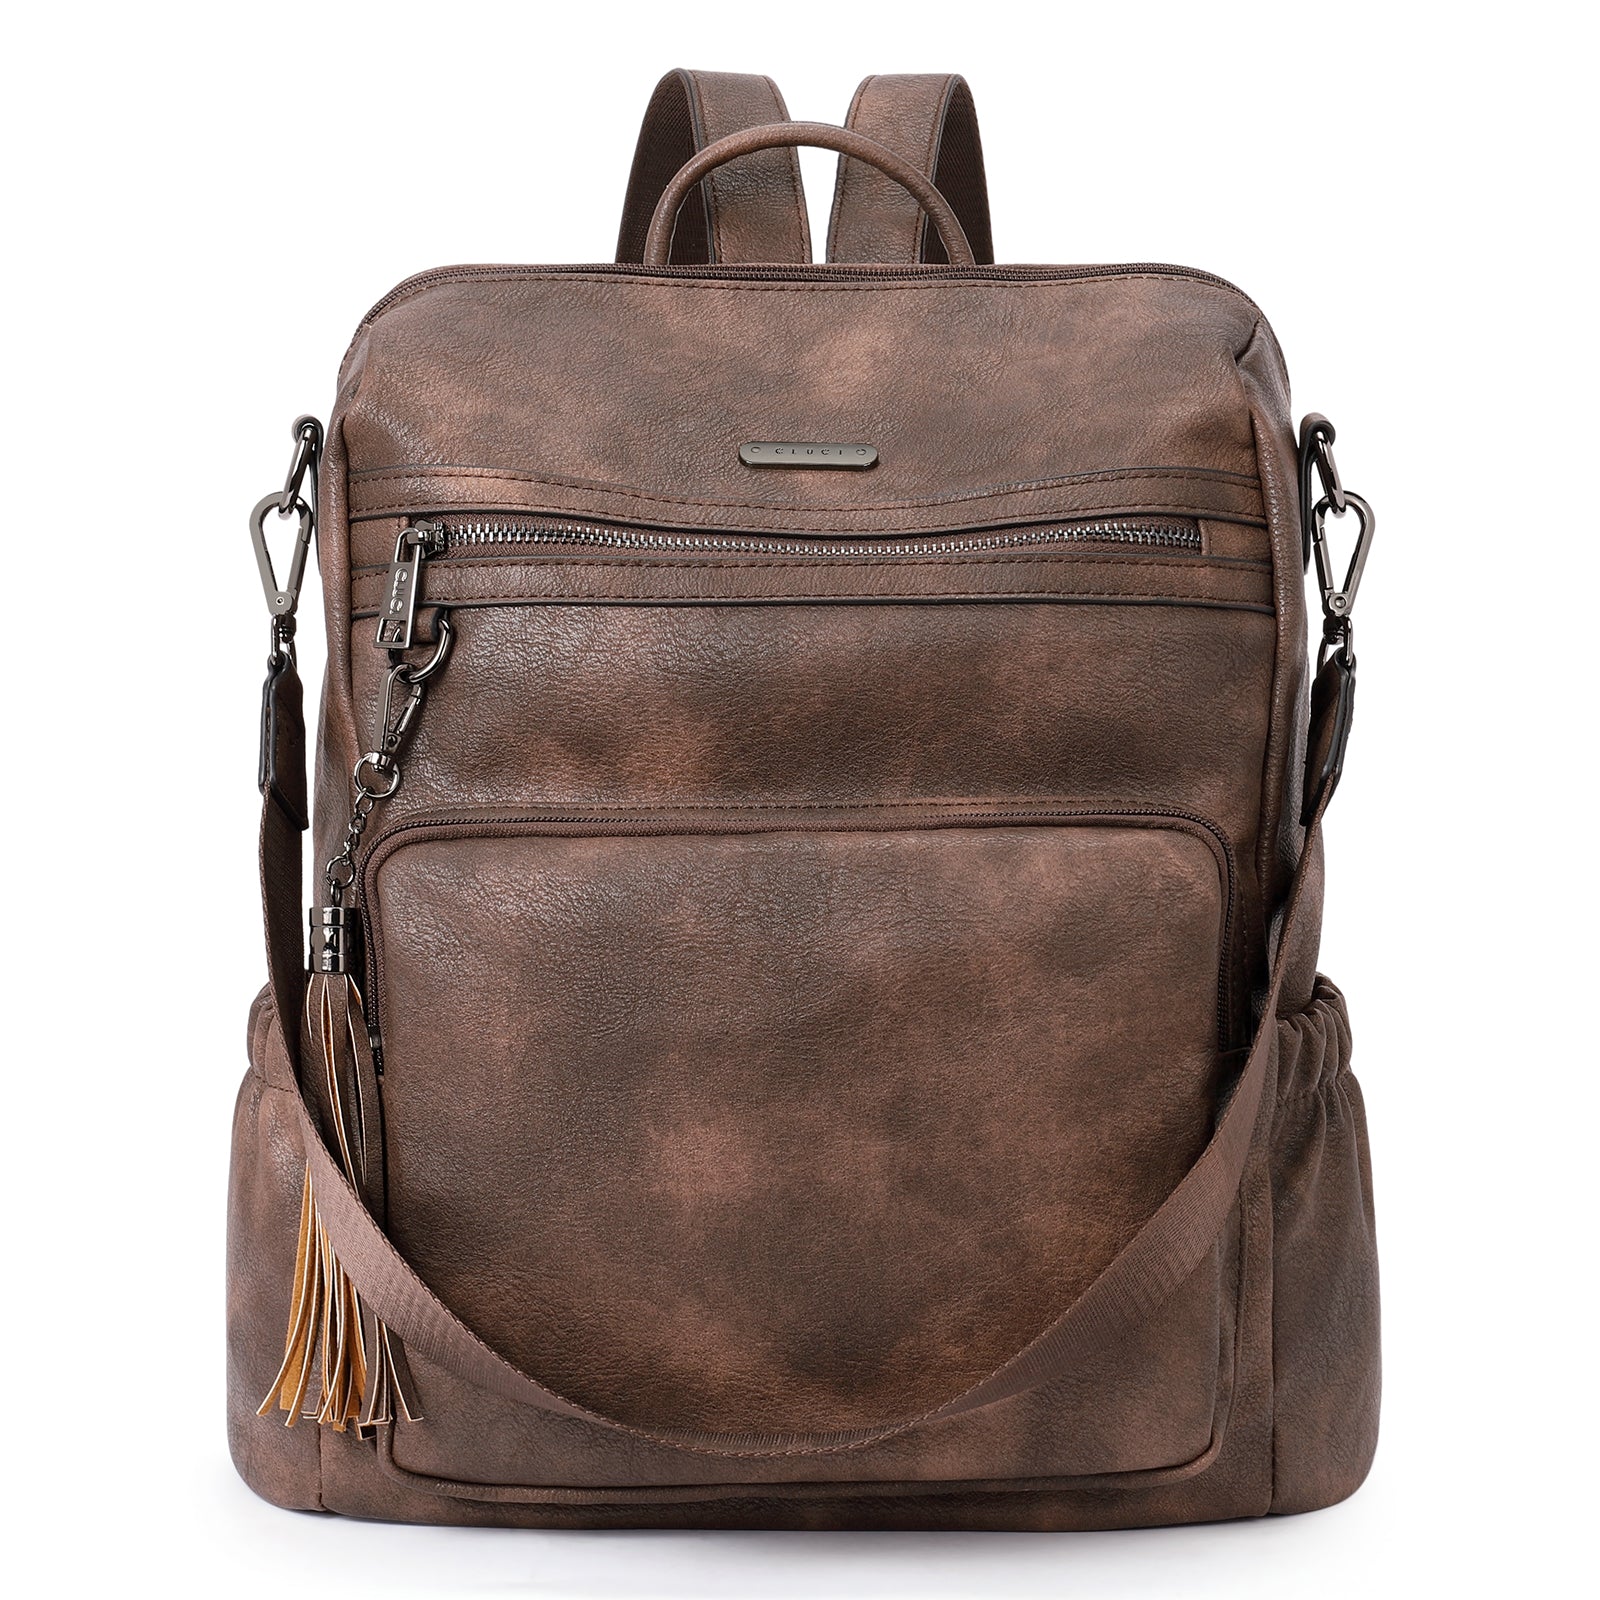 Greene Women's Leather Backpack Purse For Commuting | Two-Toned Vintage